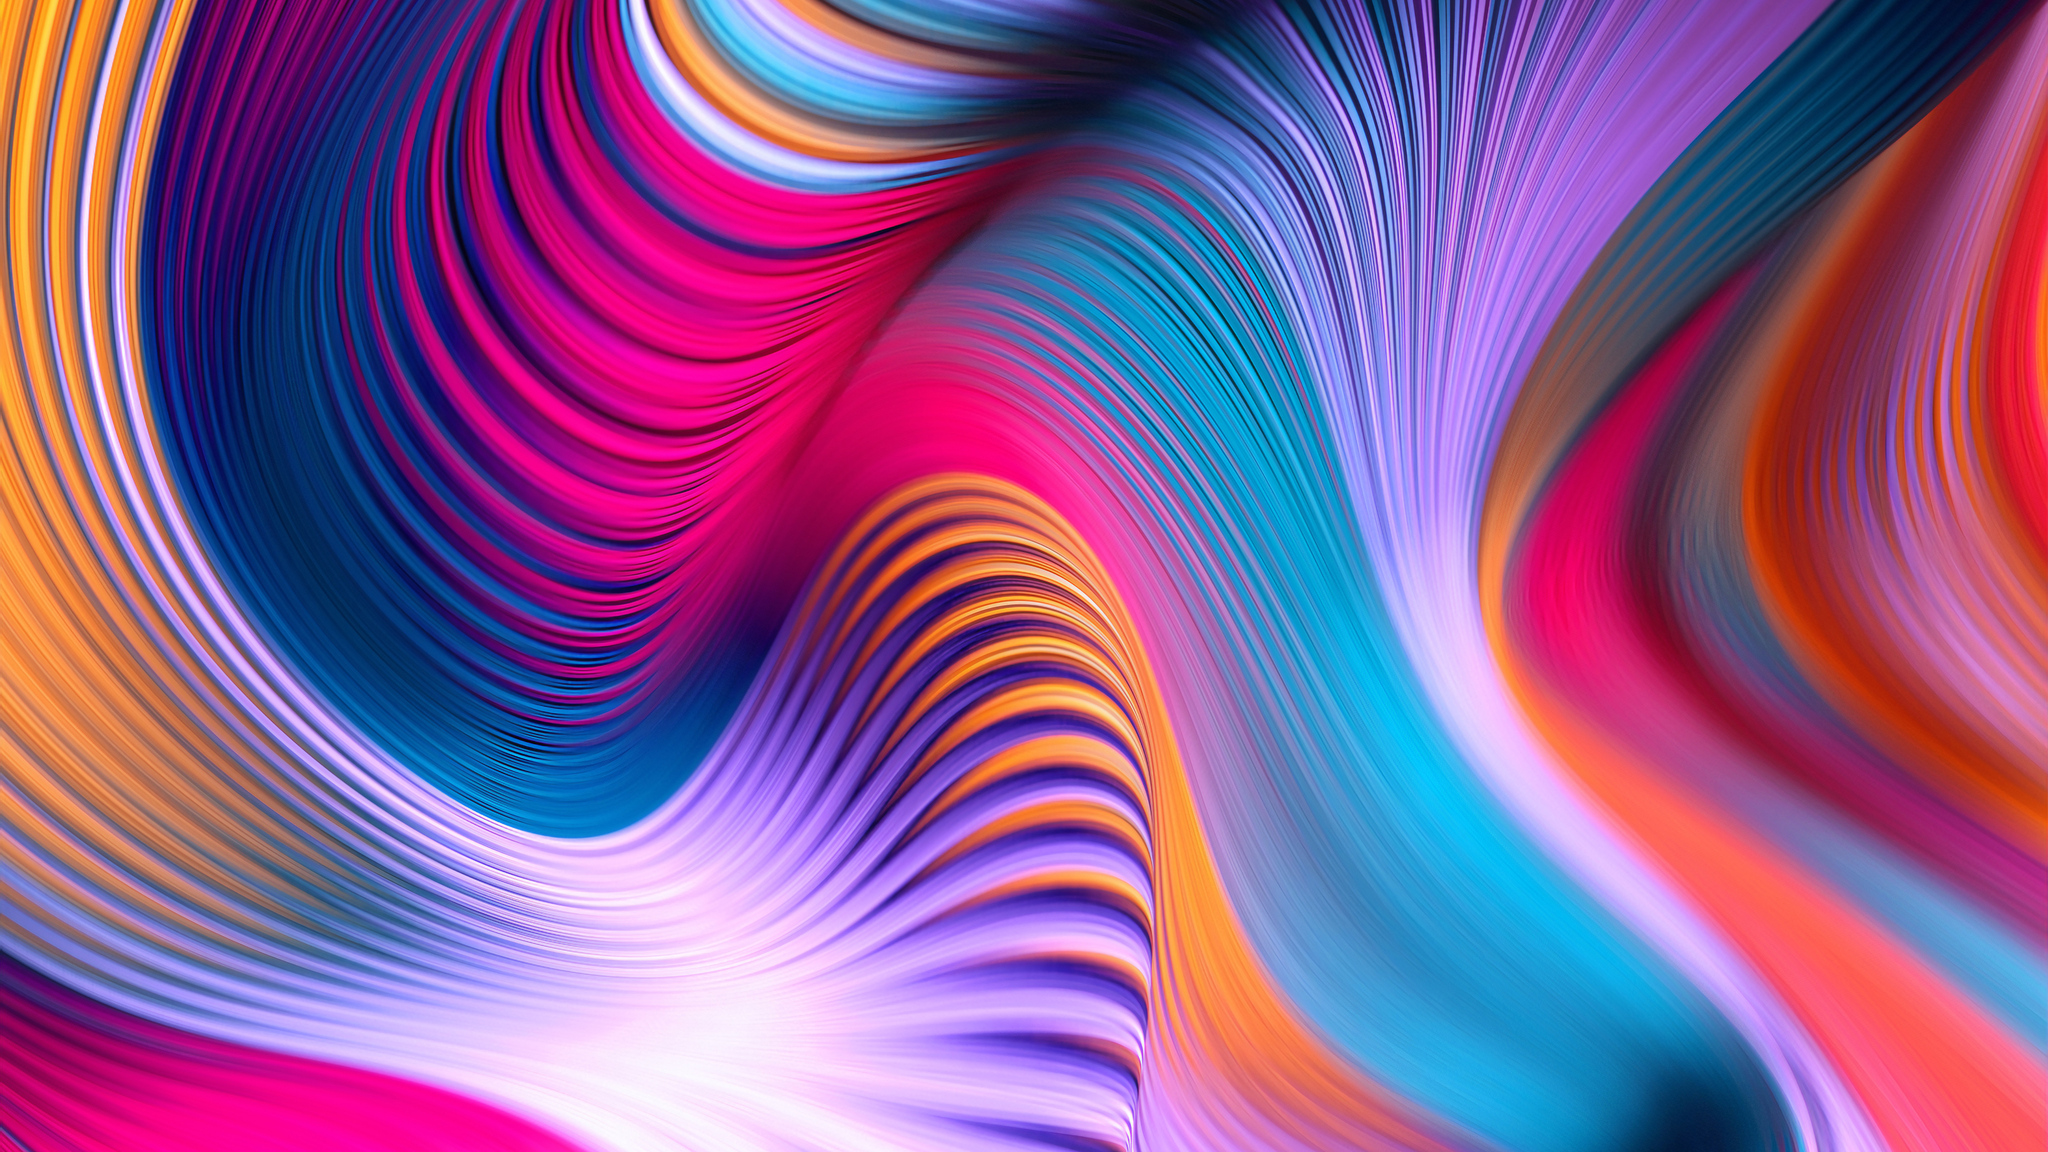 2048x1152 Colorful Movements Of Abstract Art 4k Wallpaper,2048x1152 ...